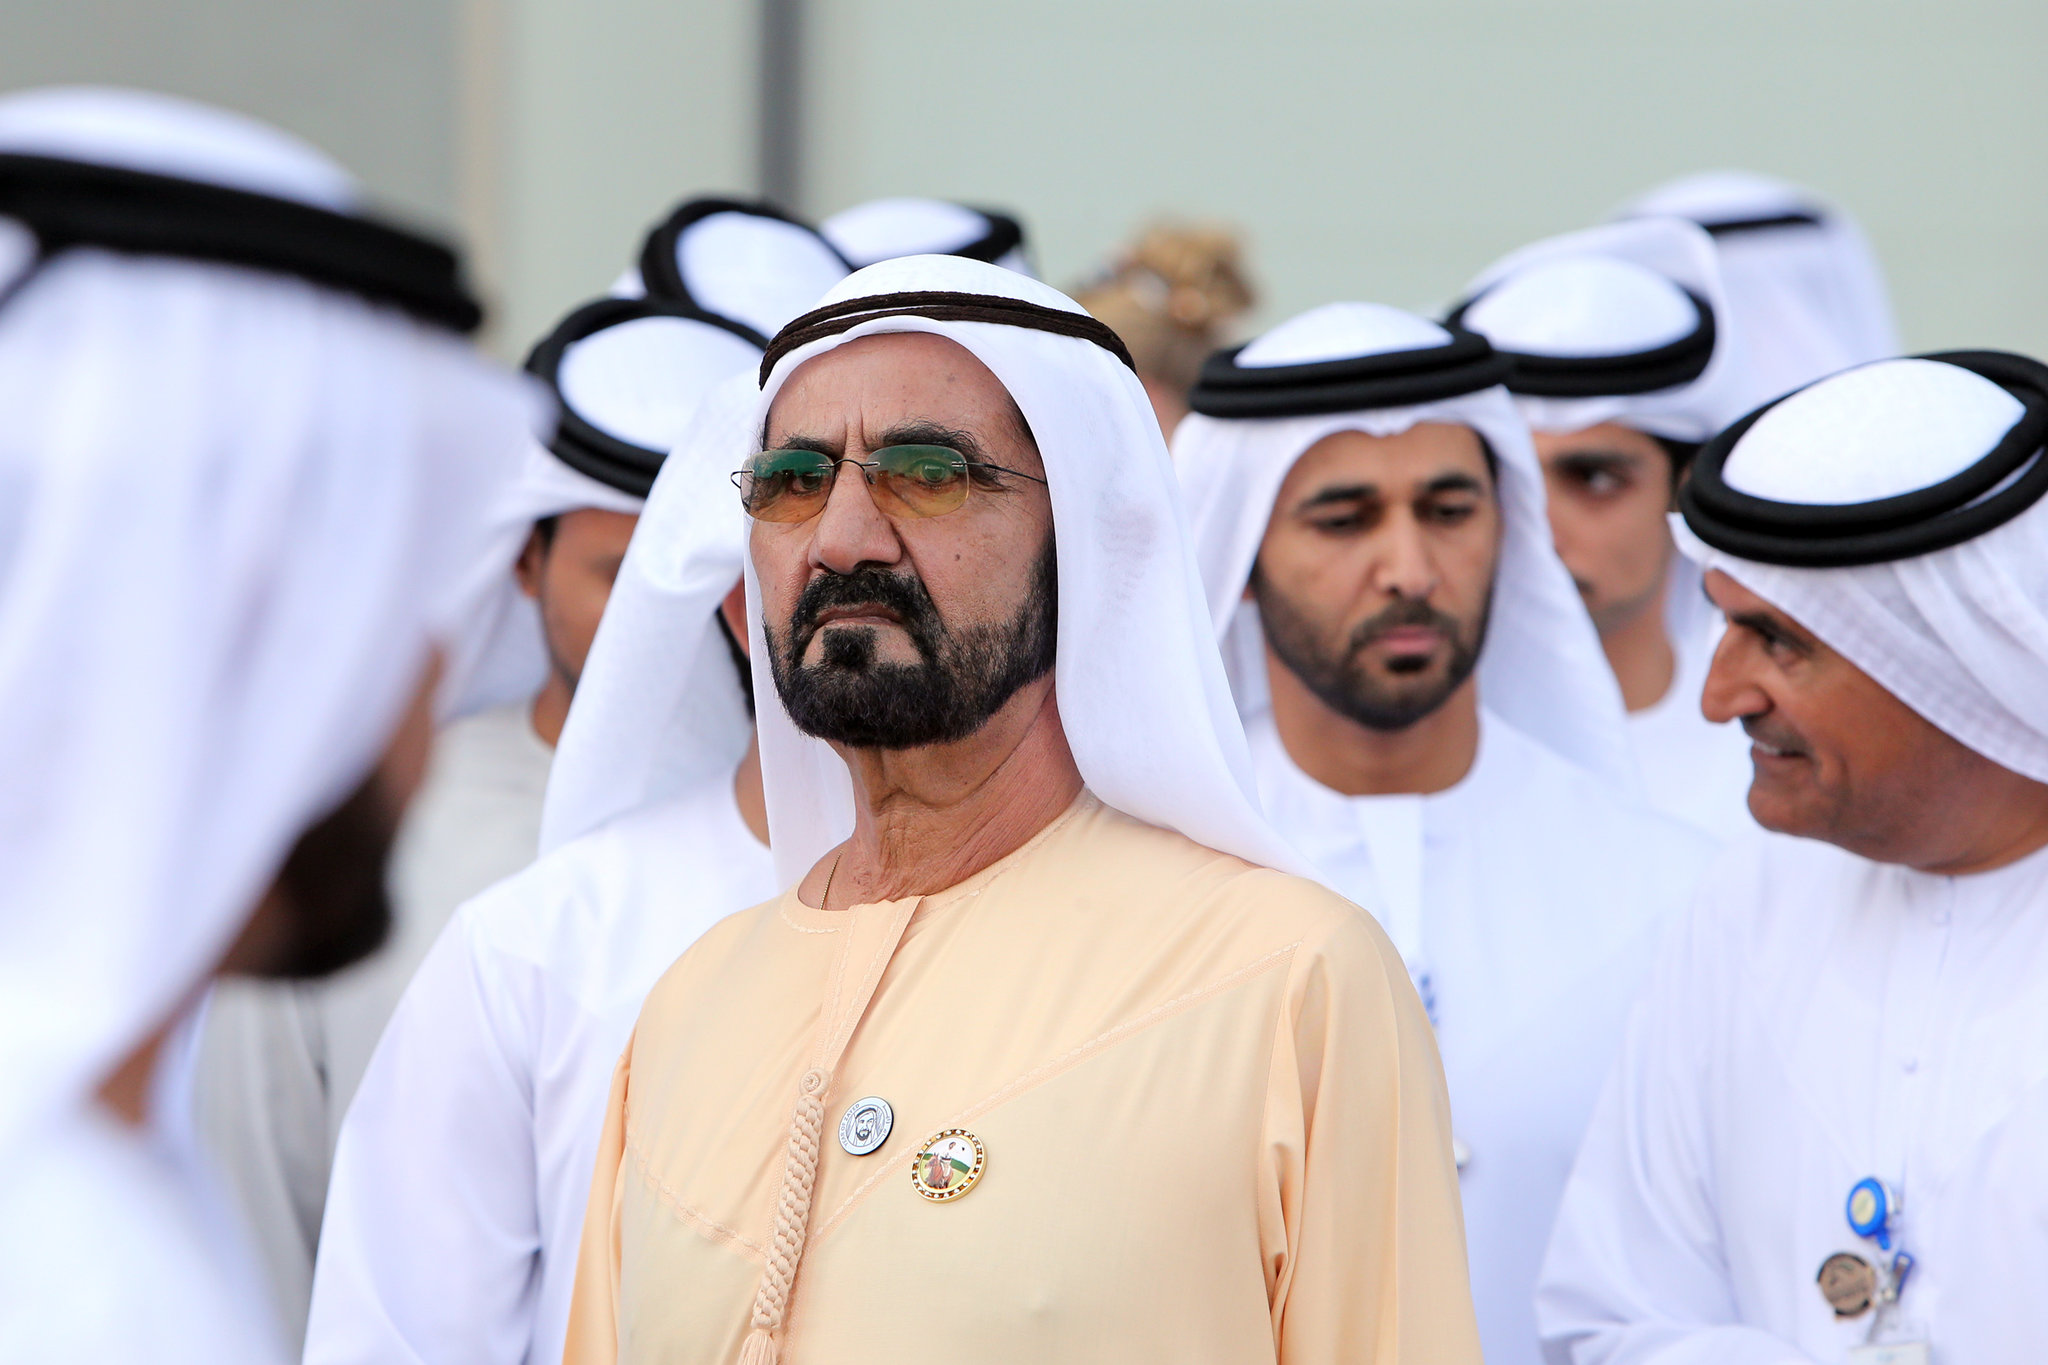 Dubai Ruler Imprisoned His Daughters and Threatened One of His Wives, U.K. Court Rules